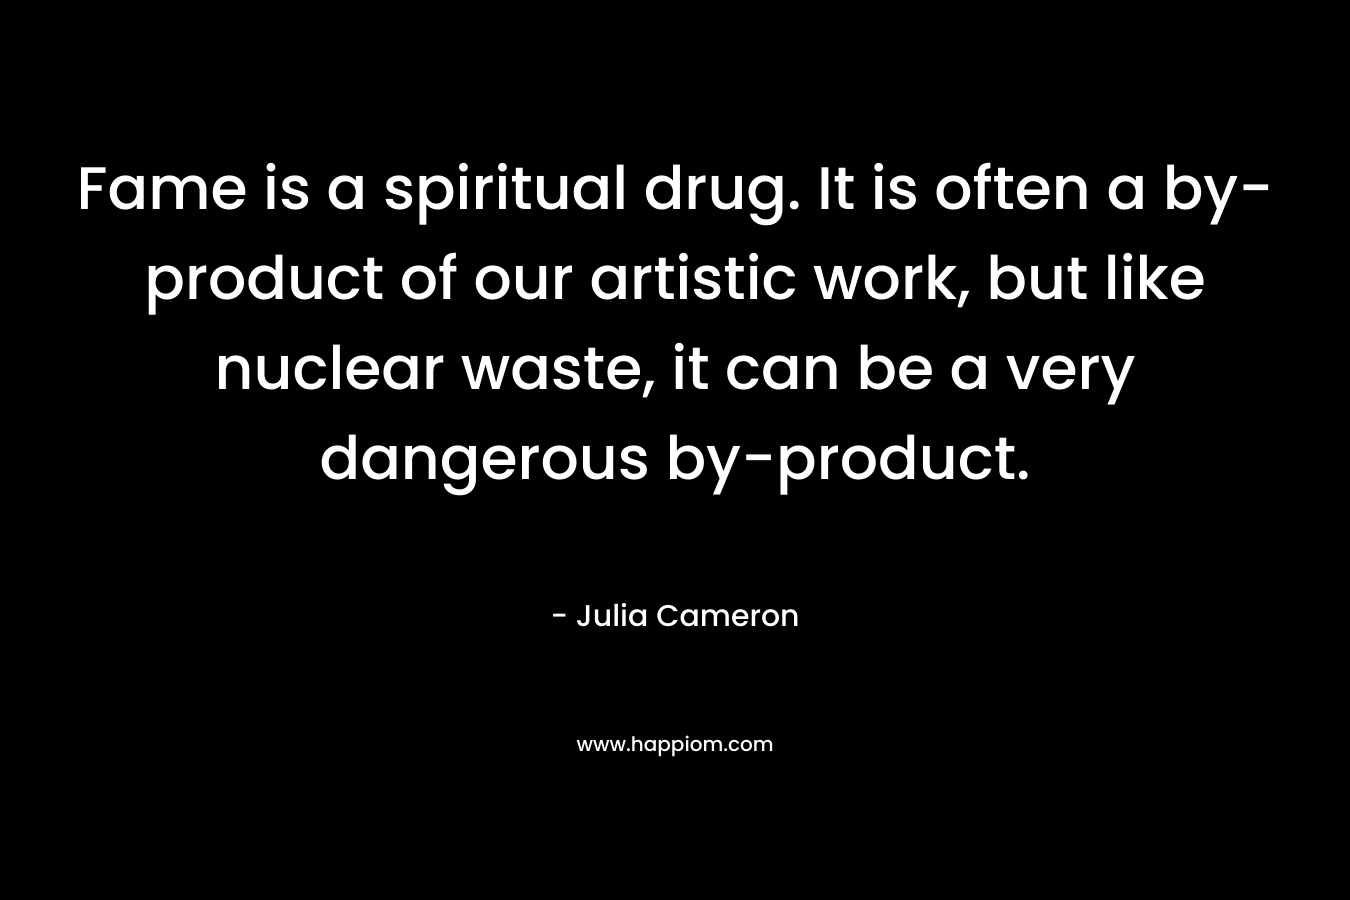 Fame is a spiritual drug. It is often a by-product of our artistic work, but like nuclear waste, it can be a very dangerous by-product.